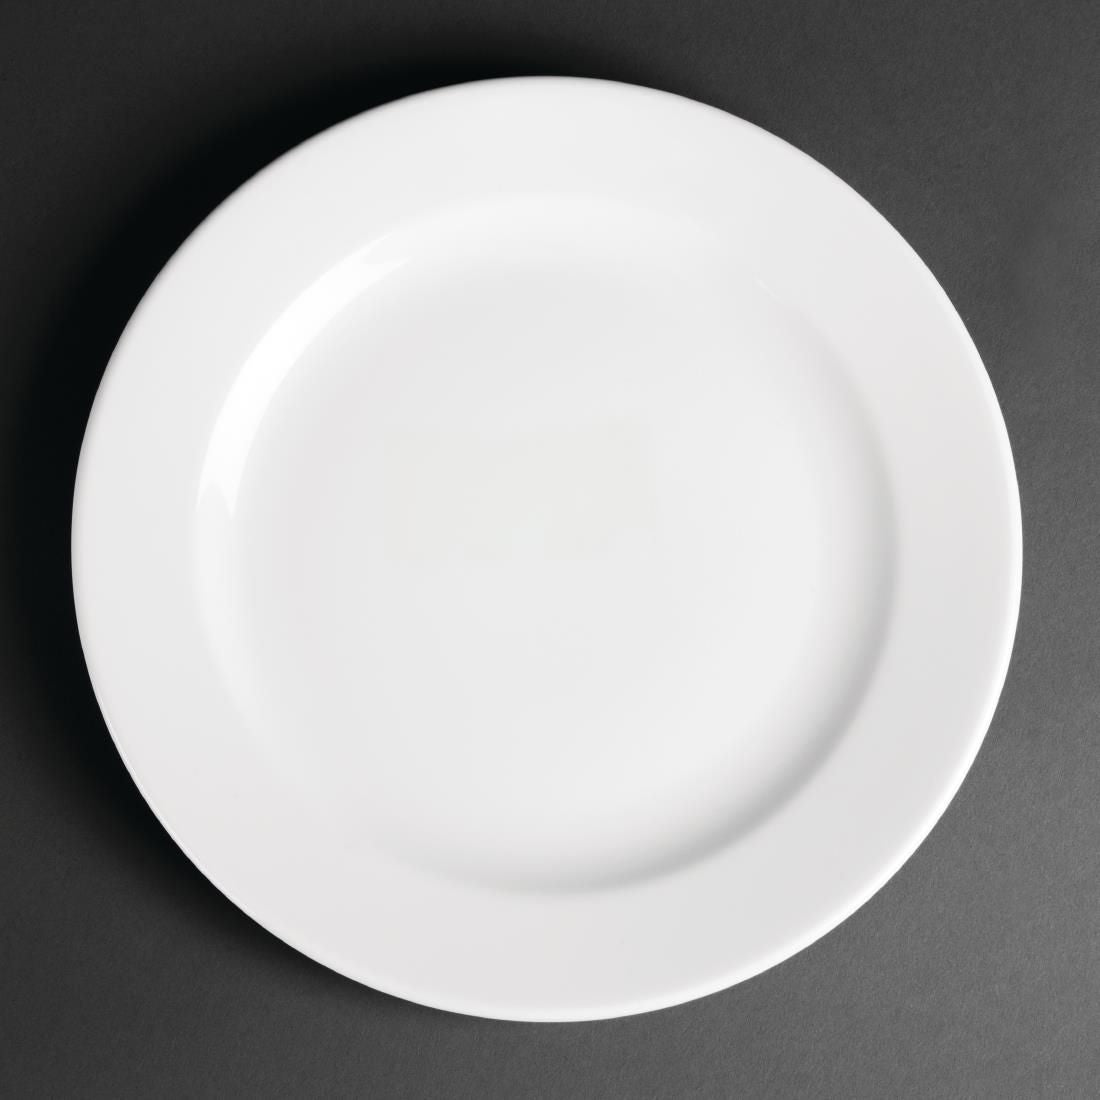 CG008 Royal Porcelain Classic White Wide Rim Plates 240mm (Pack of 12)